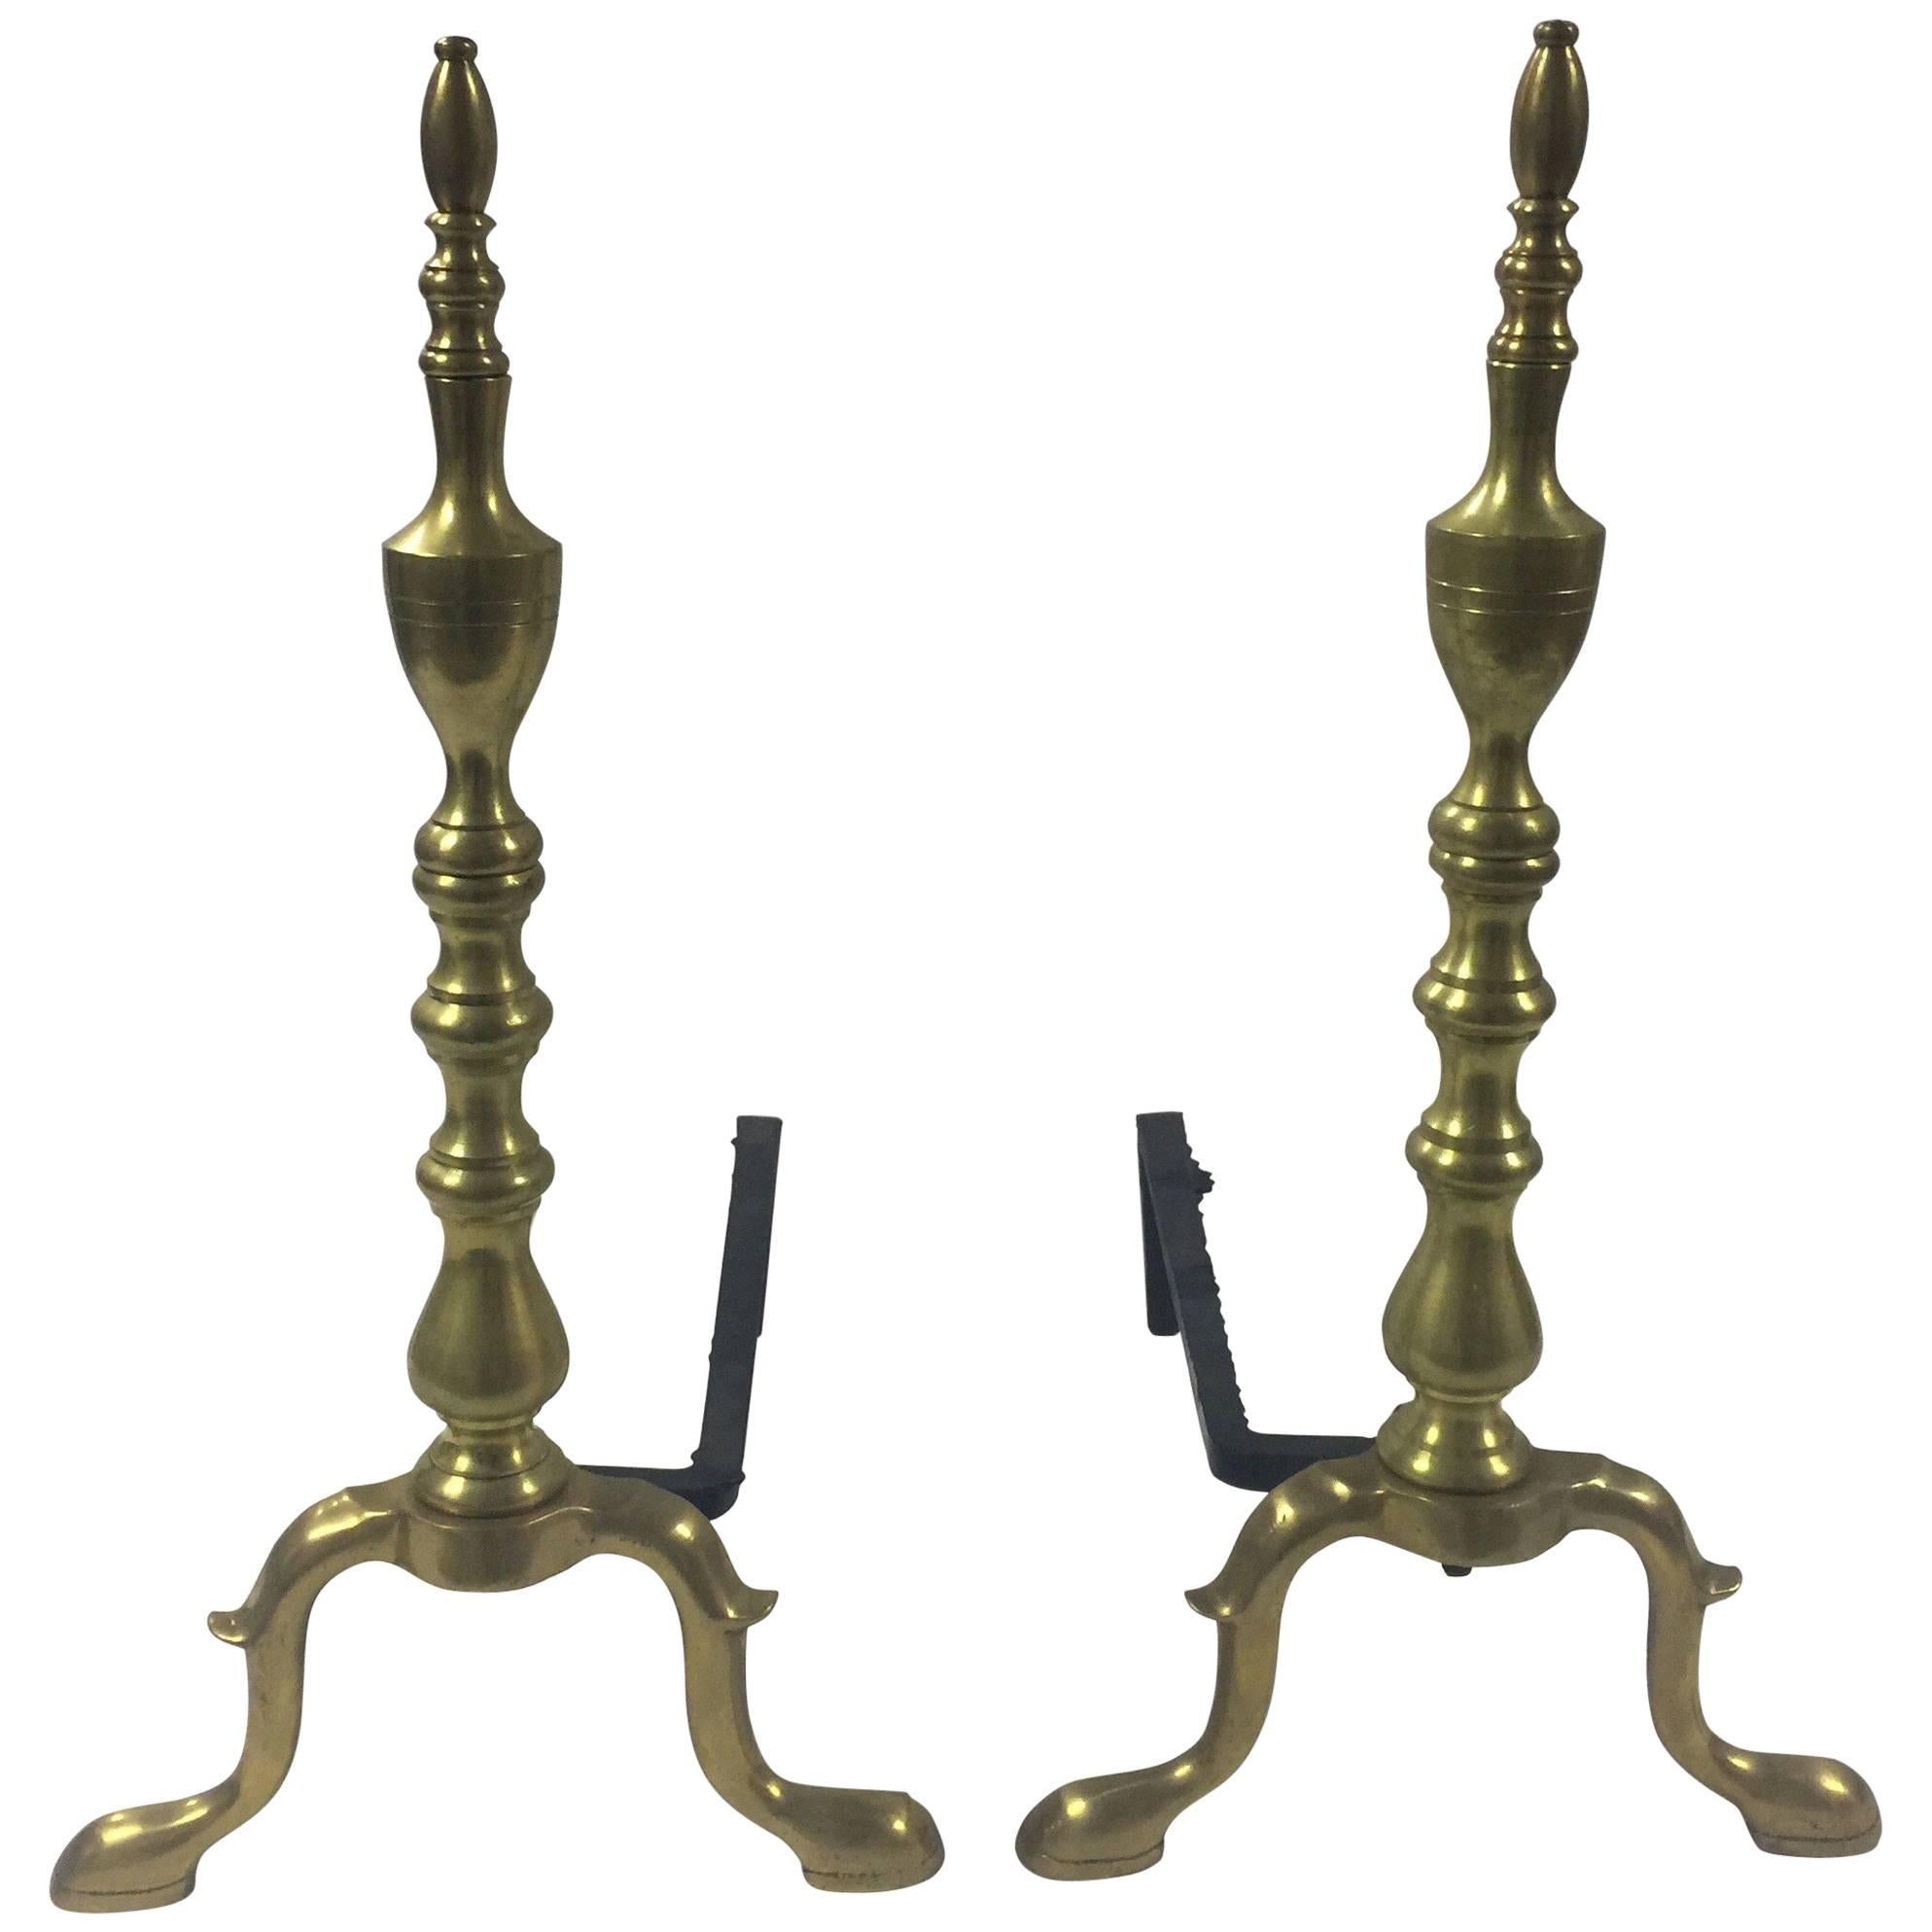 Vintage 1940s Traditional Polished Brass Andirons